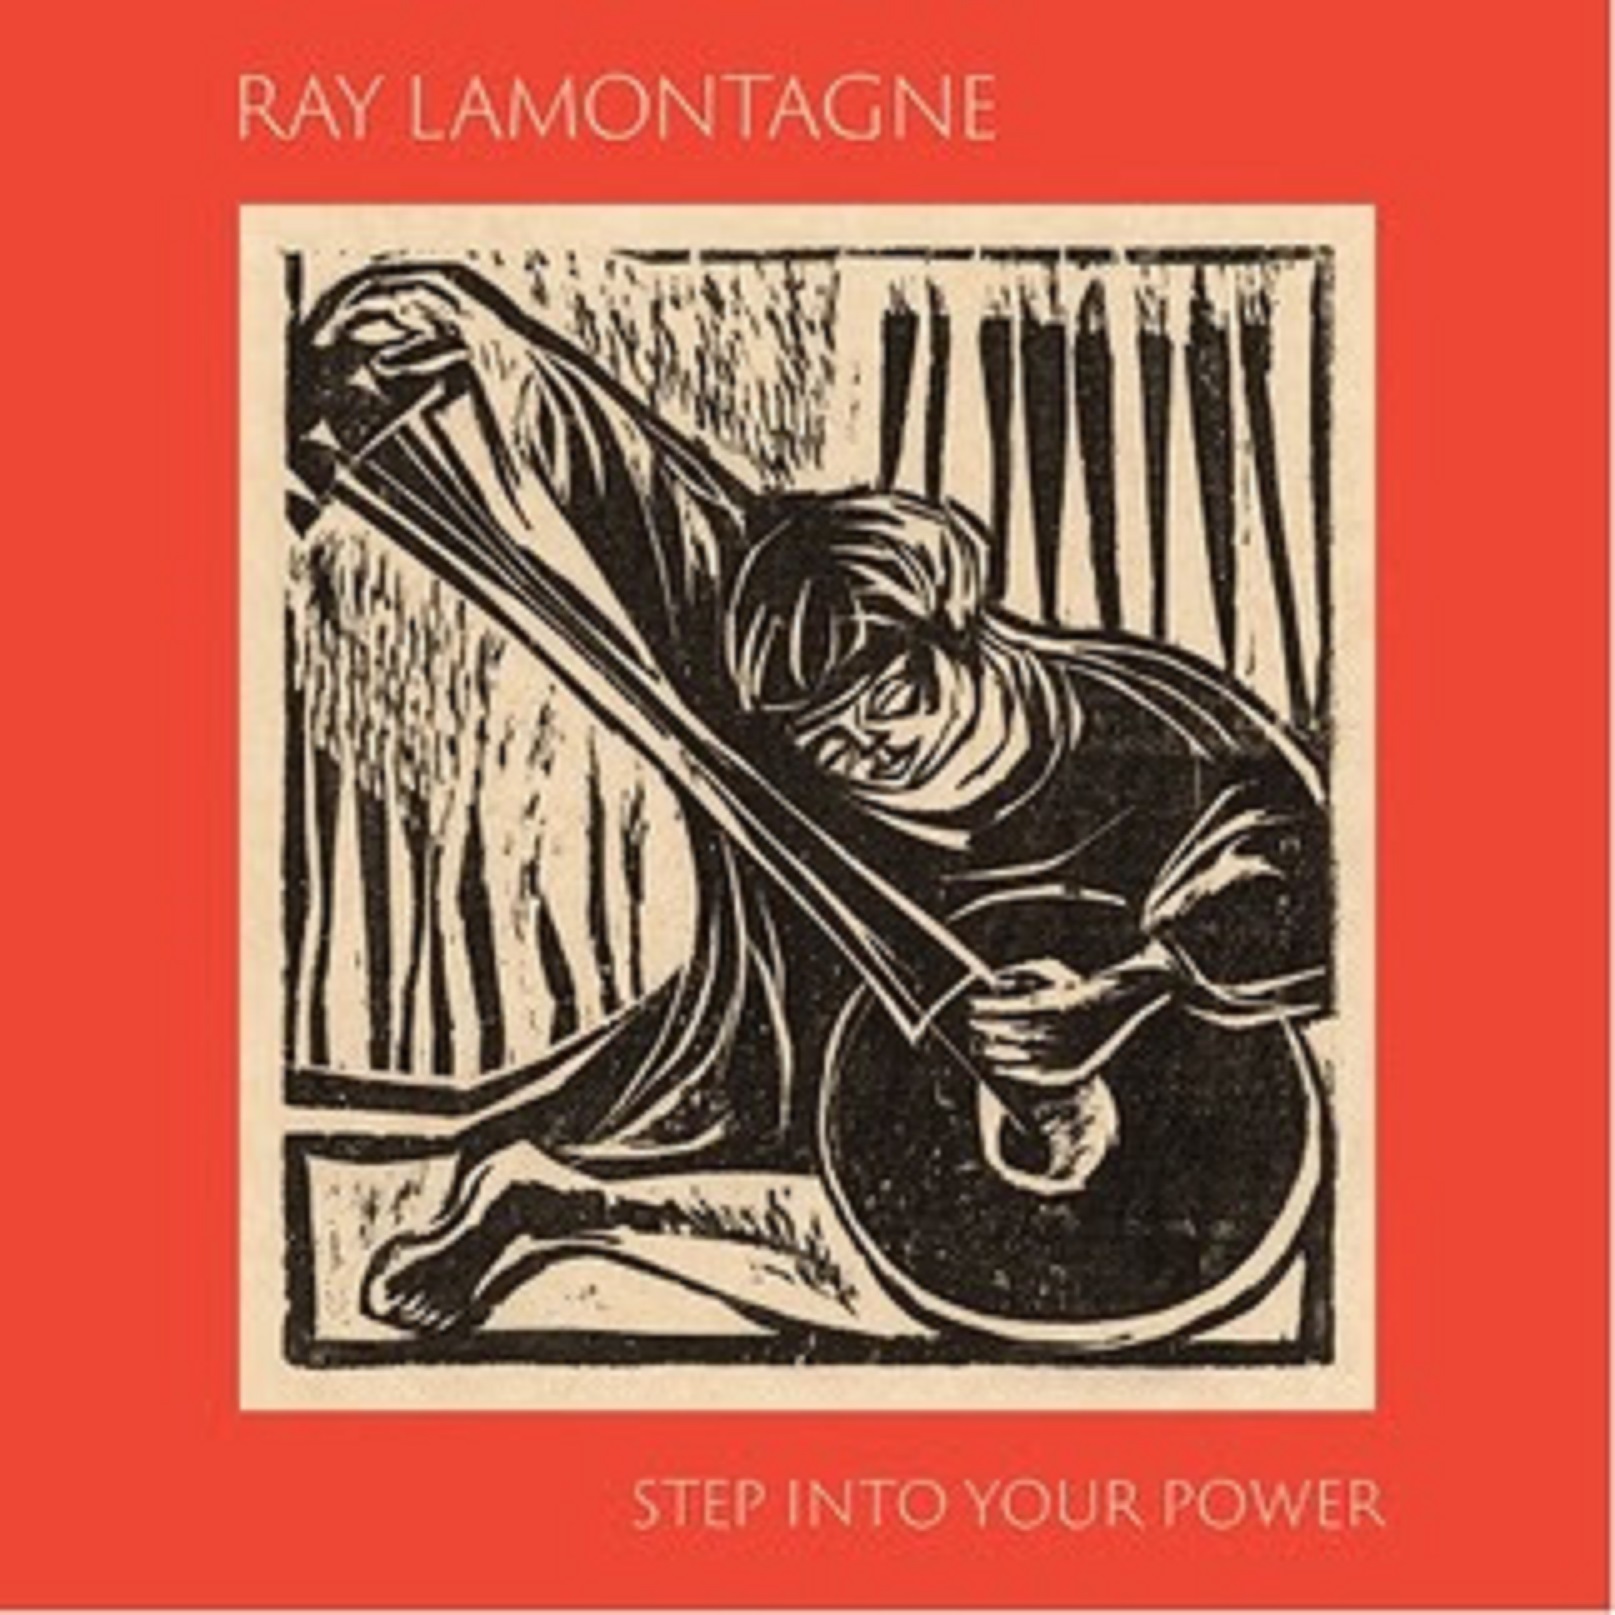 Ray LaMontagne returns with new single and video "Step Into Your Power" ahead of highly anticipated new album Long Way Home out August 16